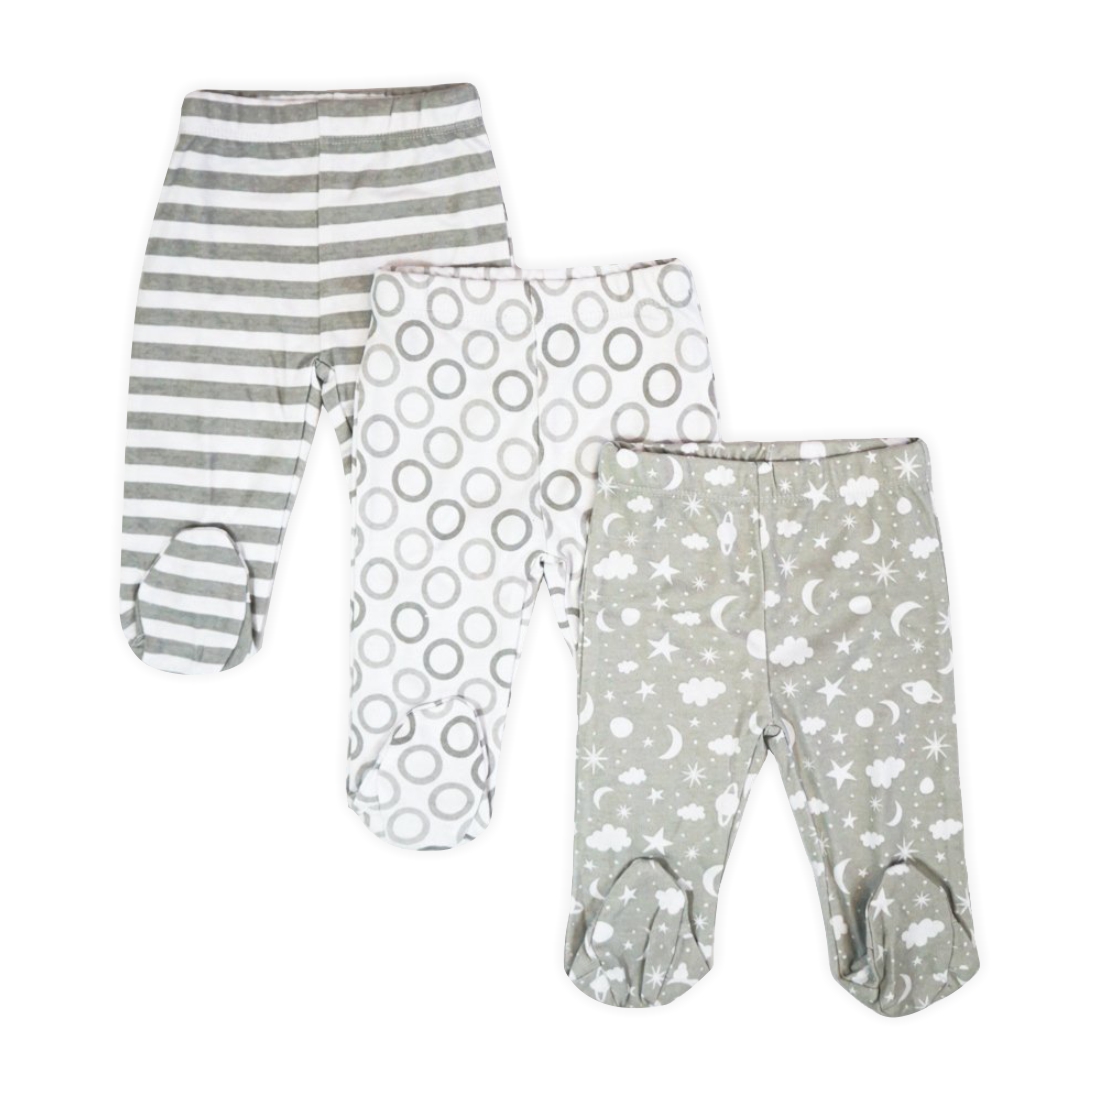 Spasilk Baby Boys' Cotton Pull on Footed Pants, Pack of 3, Gray Celestial - image 1 of 7